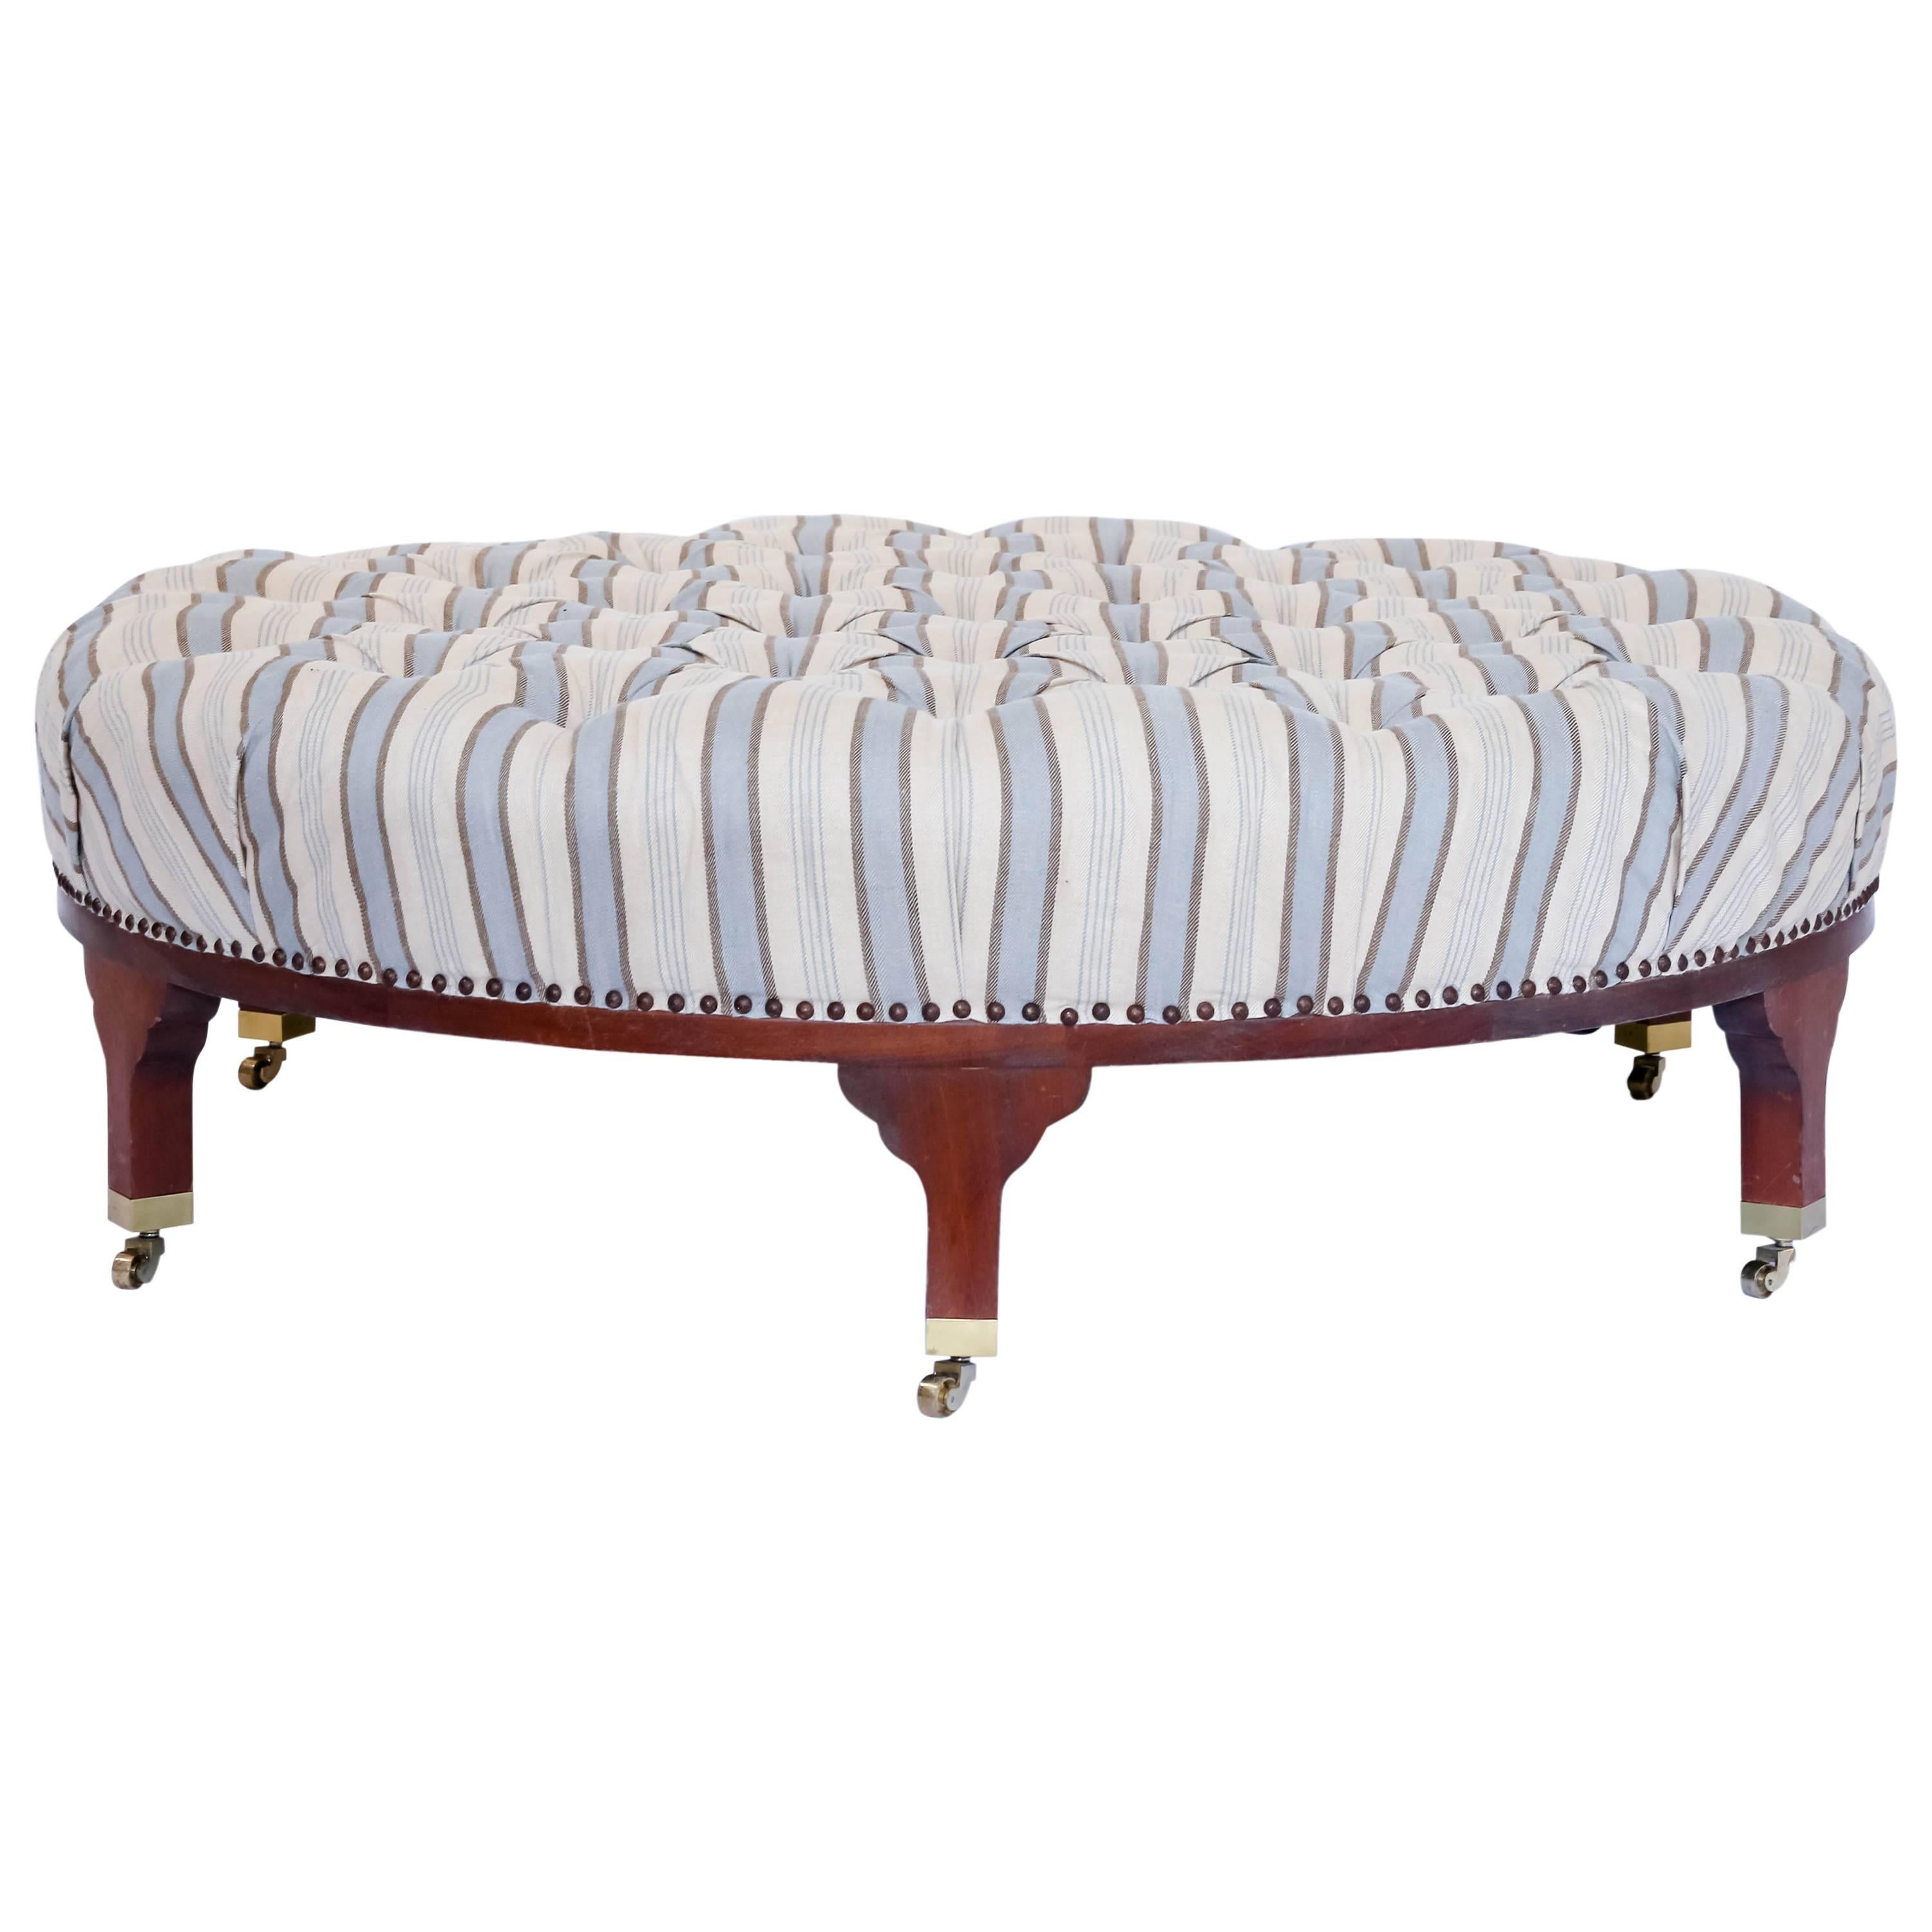 Large Round Tufted Ottoman with Striped Upholstery